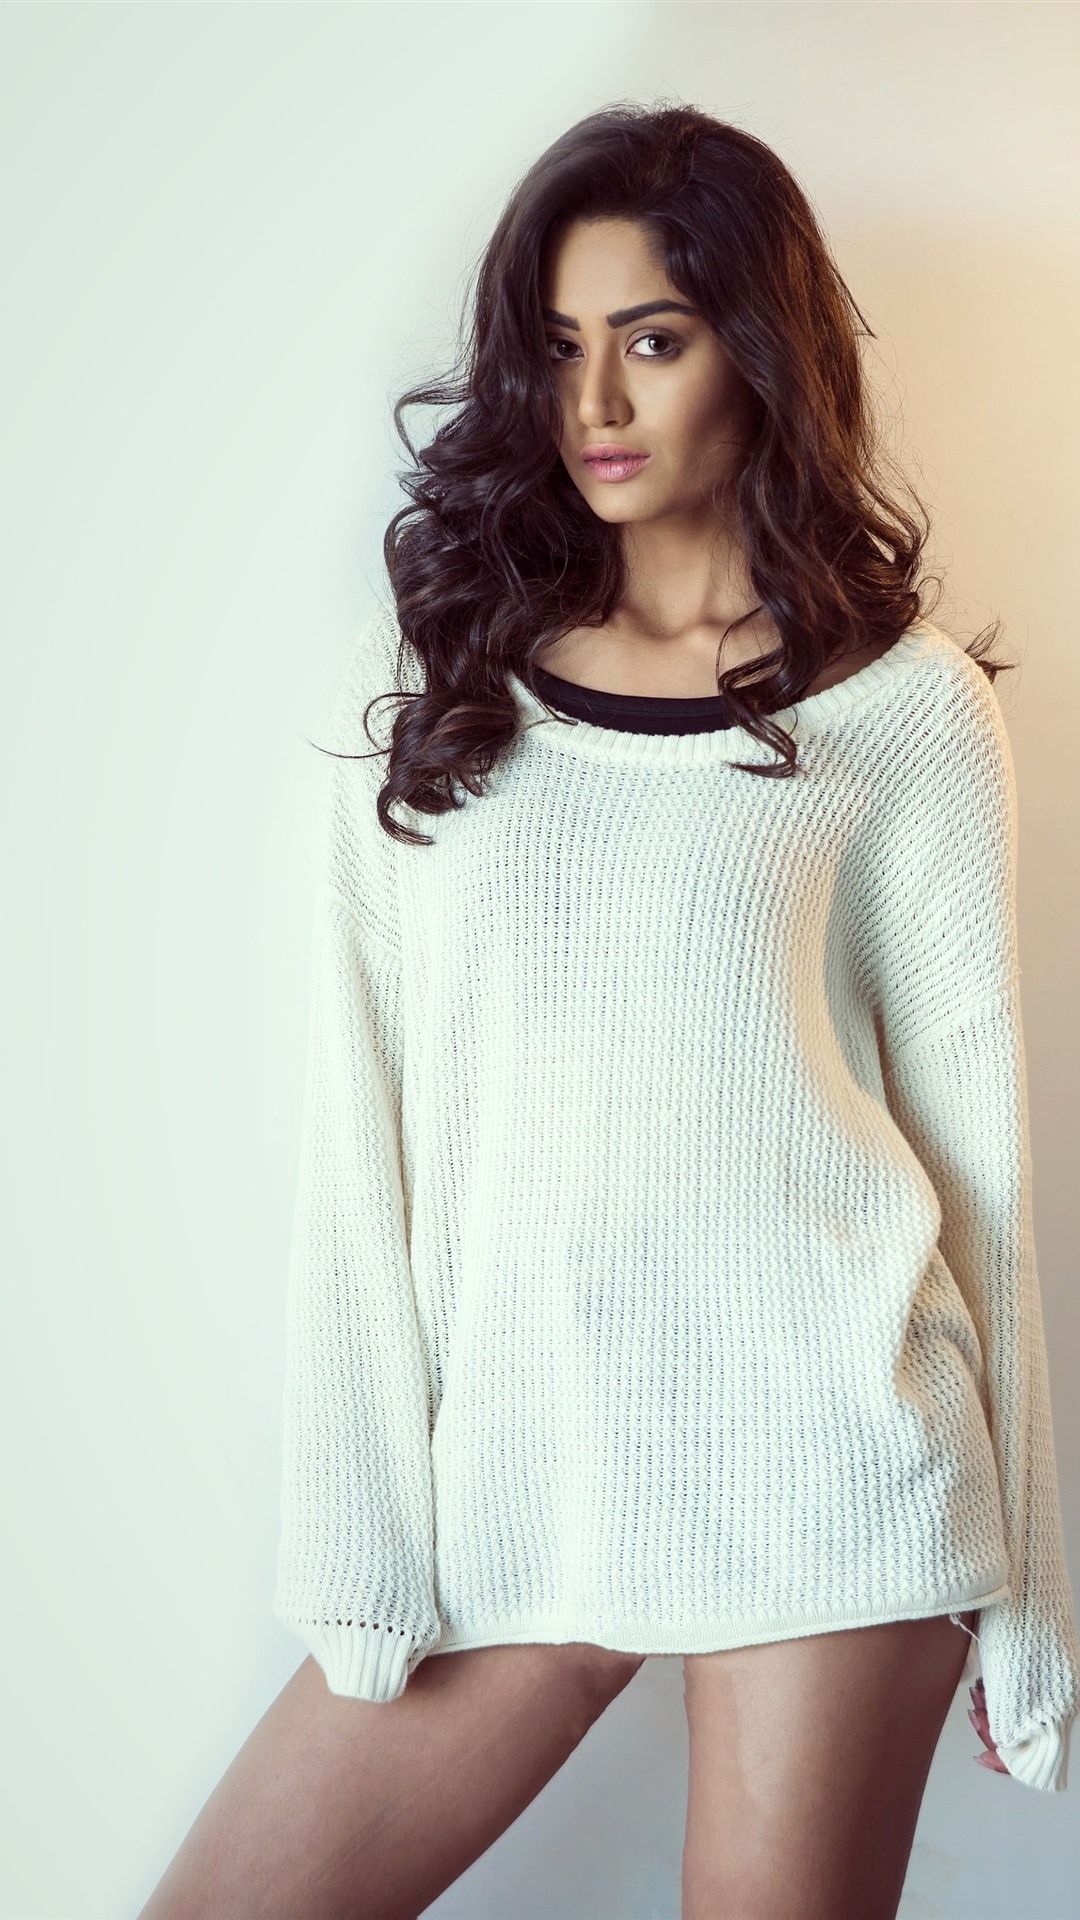 Curly Hair Girl, White Sweater, 1242x2688 IPhone 11 Pro XS Max Wallpaper, Background, Picture, Image